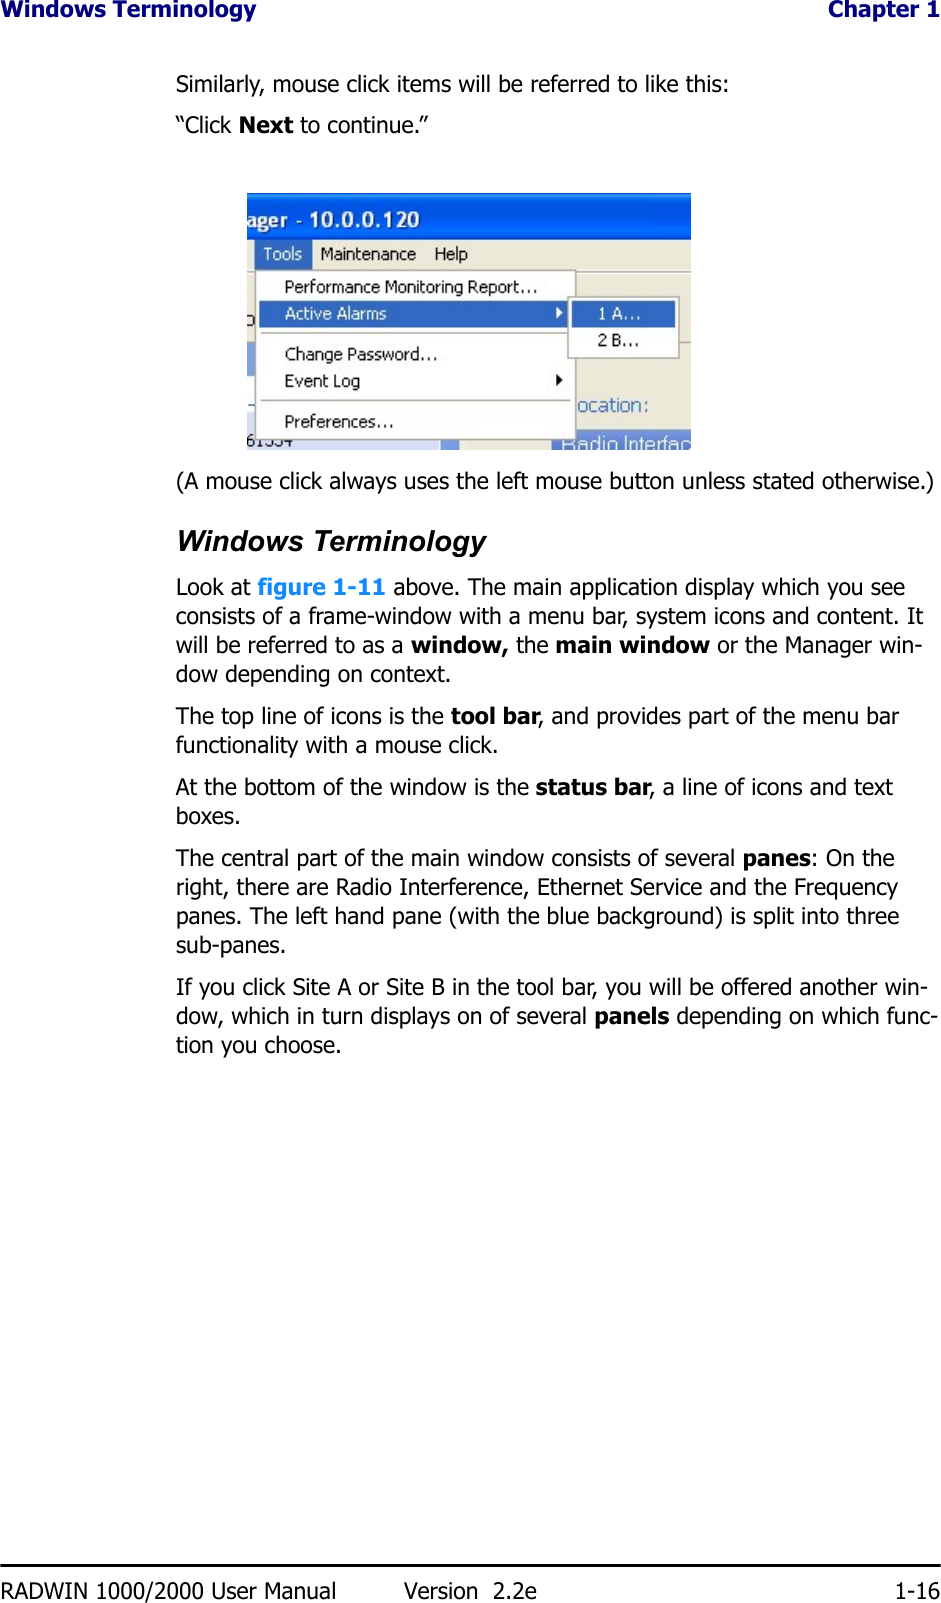 Windows Terminology  Chapter 1RADWIN 1000/2000 User Manual Version  2.2e 1-16Similarly, mouse click items will be referred to like this:“Click Next to continue.”(A mouse click always uses the left mouse button unless stated otherwise.)Windows TerminologyLook at figure 1-11 above. The main application display which you see consists of a frame-window with a menu bar, system icons and content. It will be referred to as a window, the main window or the Manager win-dow depending on context.The top line of icons is the tool bar, and provides part of the menu bar functionality with a mouse click.At the bottom of the window is the status bar, a line of icons and text boxes.The central part of the main window consists of several panes: On the right, there are Radio Interference, Ethernet Service and the Frequency panes. The left hand pane (with the blue background) is split into three sub-panes.If you click Site A or Site B in the tool bar, you will be offered another win-dow, which in turn displays on of several panels depending on which func-tion you choose.